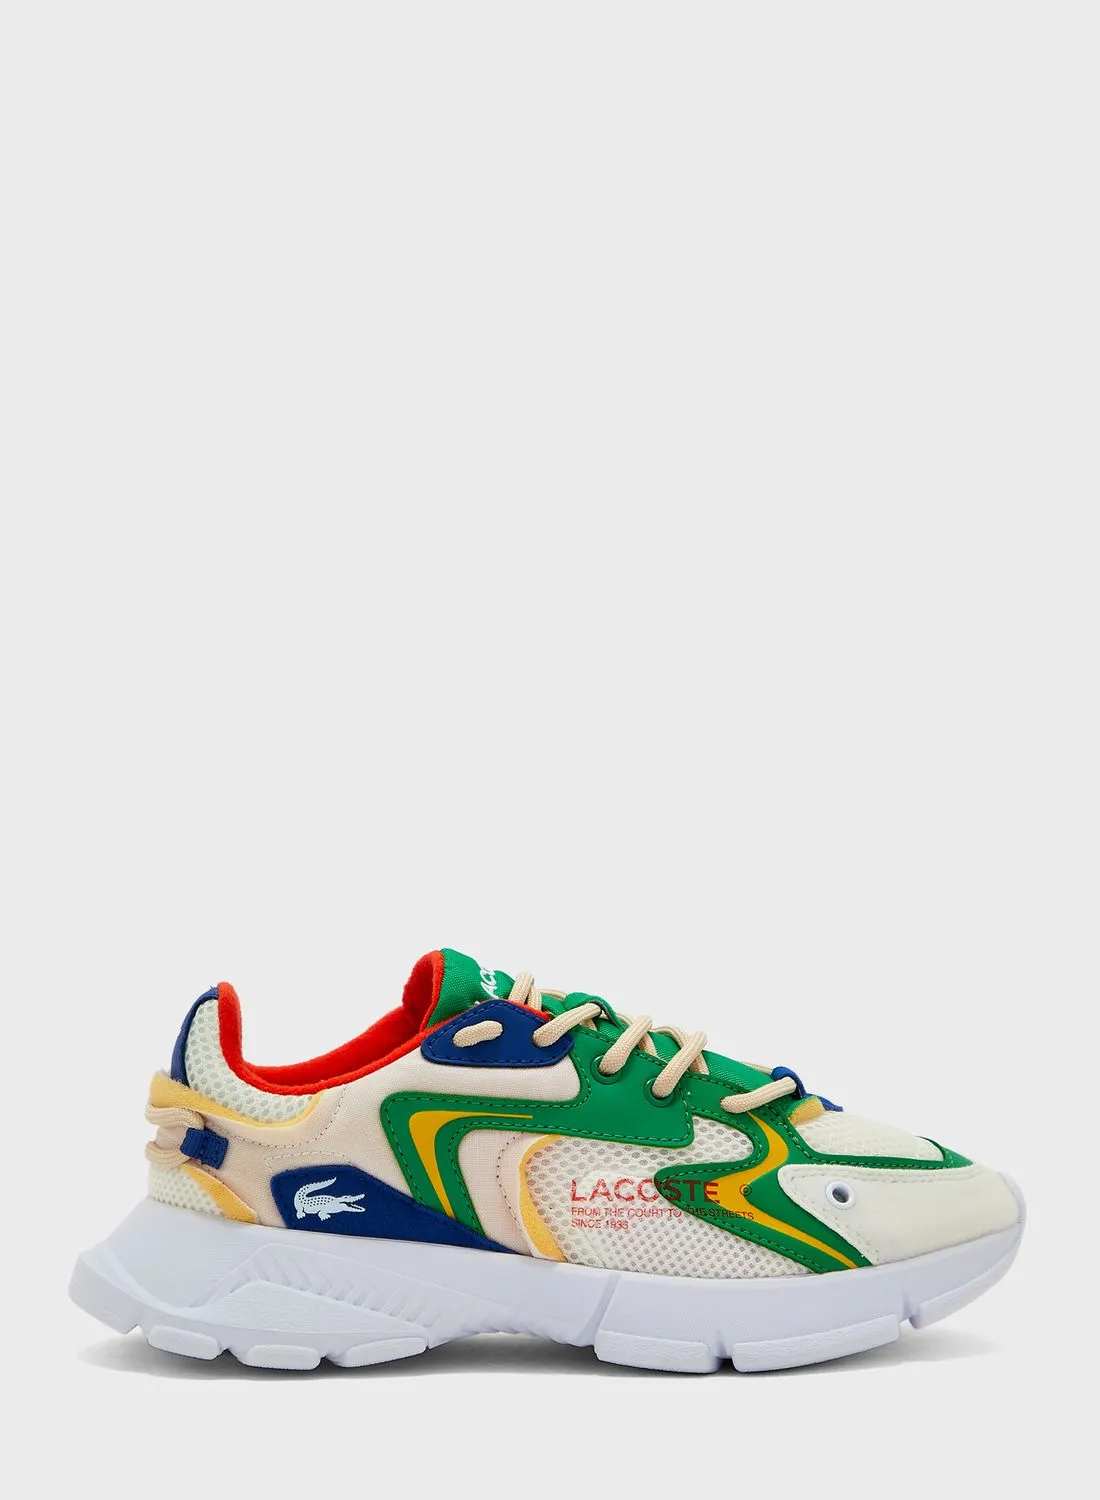 LACOSTE Kids Lace Up Athleisure Sneakers